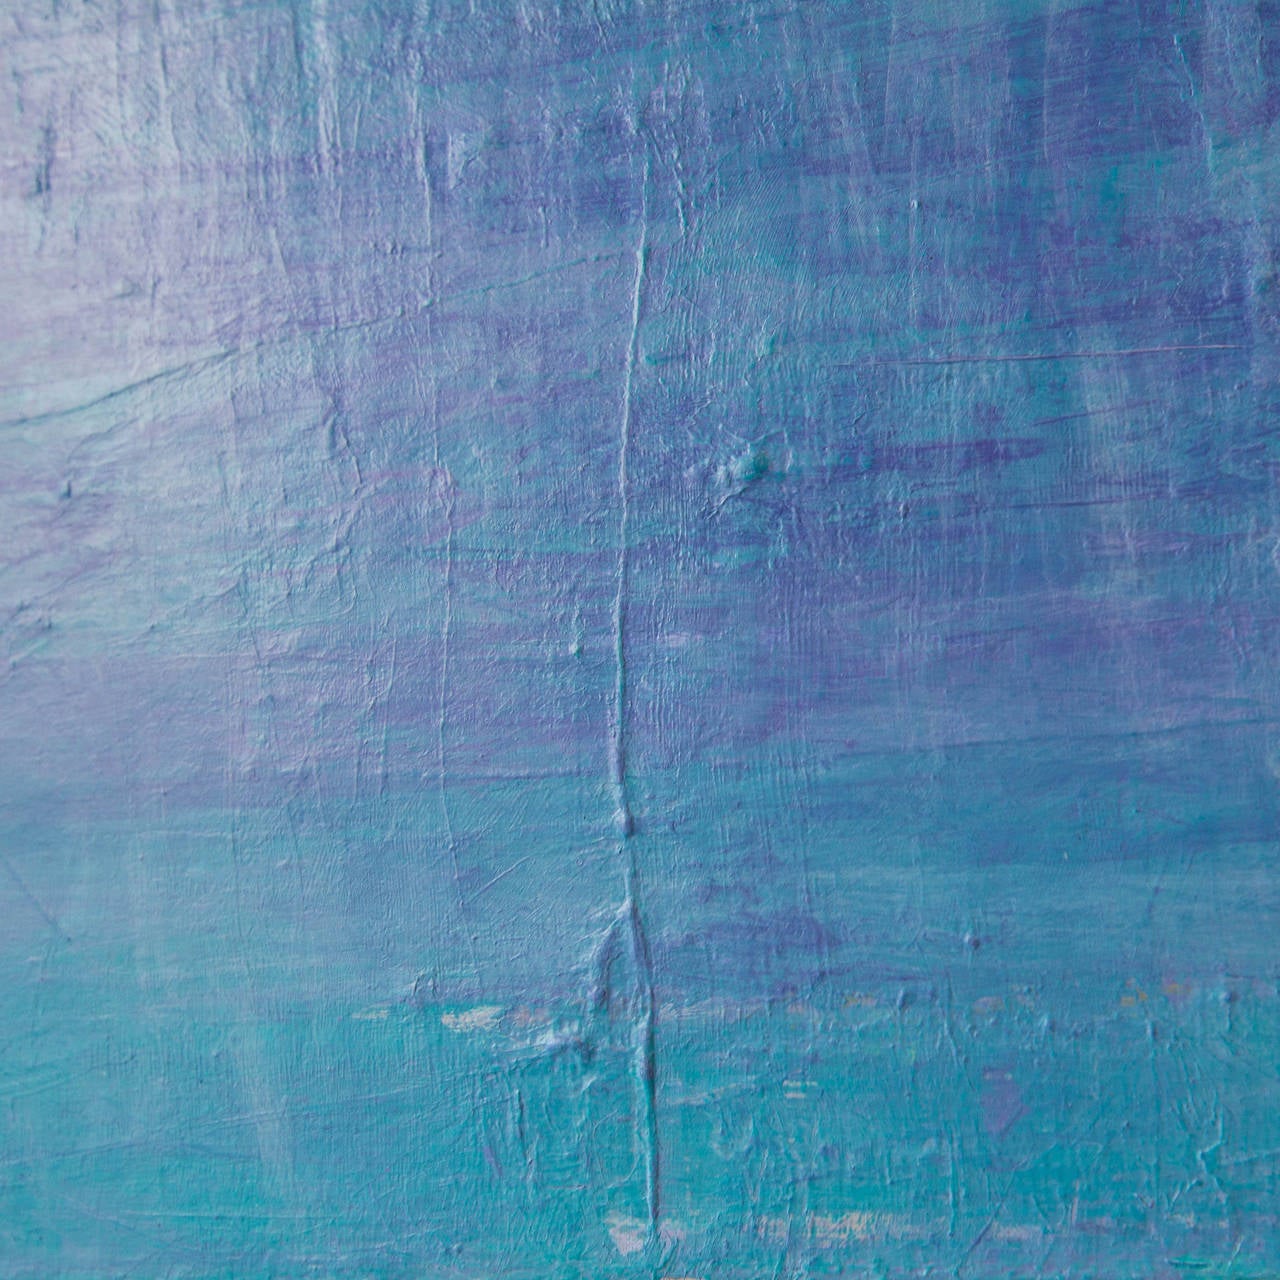 A beautiful fusion of aqua blues and violet gives this encaustic painting by E. Gibek a soothing appeal.